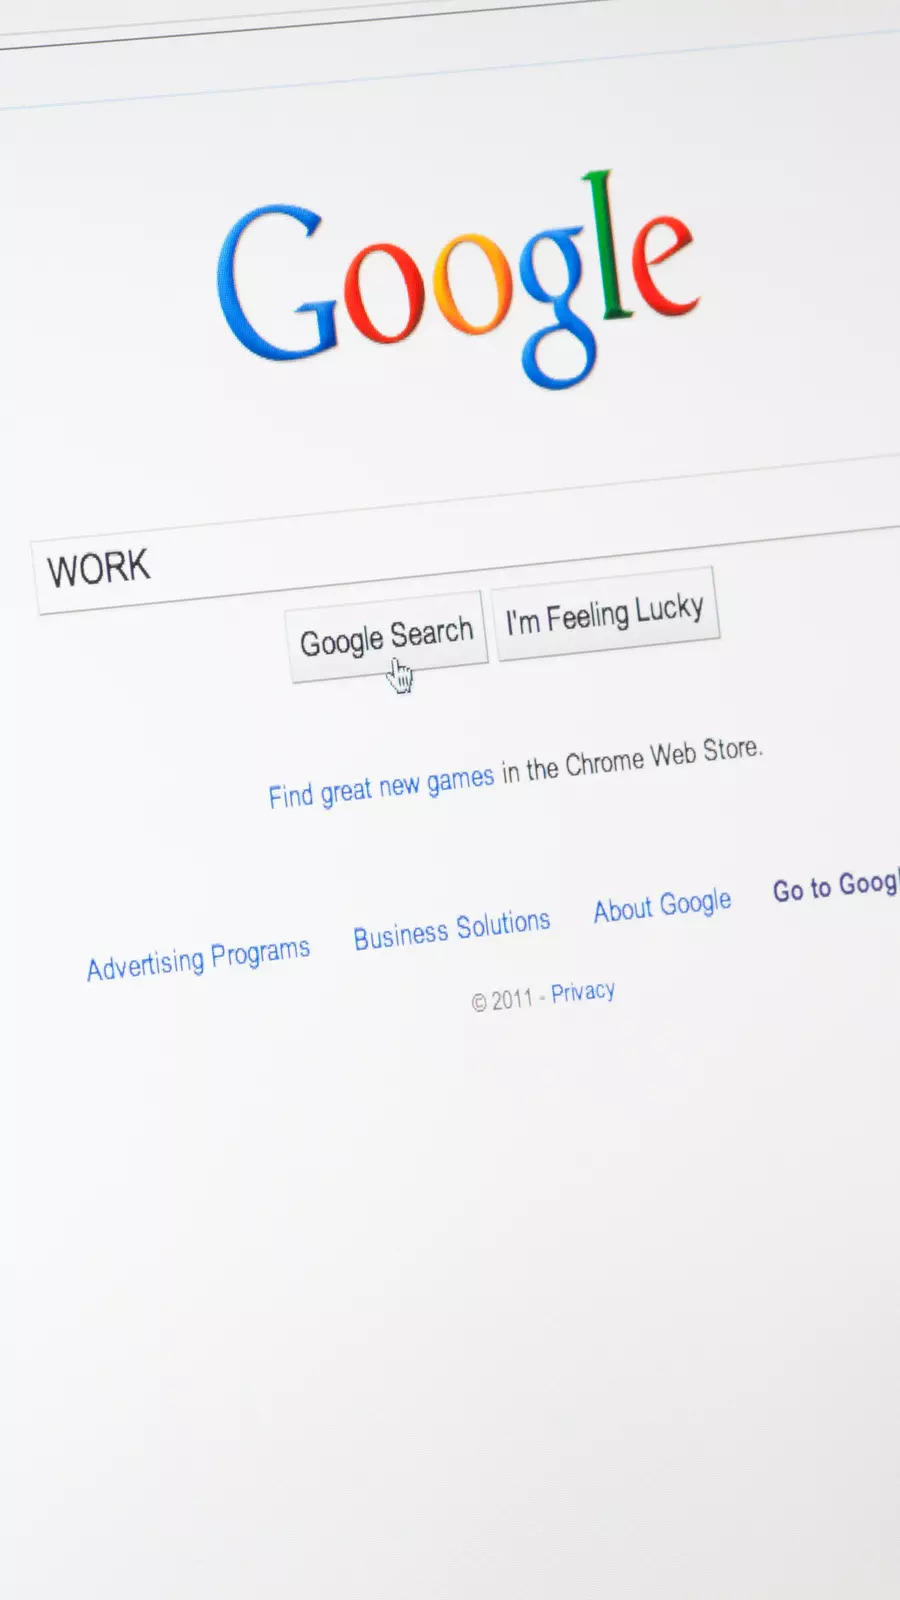 One Cool Tip .com: How to Make Google Search Do a Funky Spin